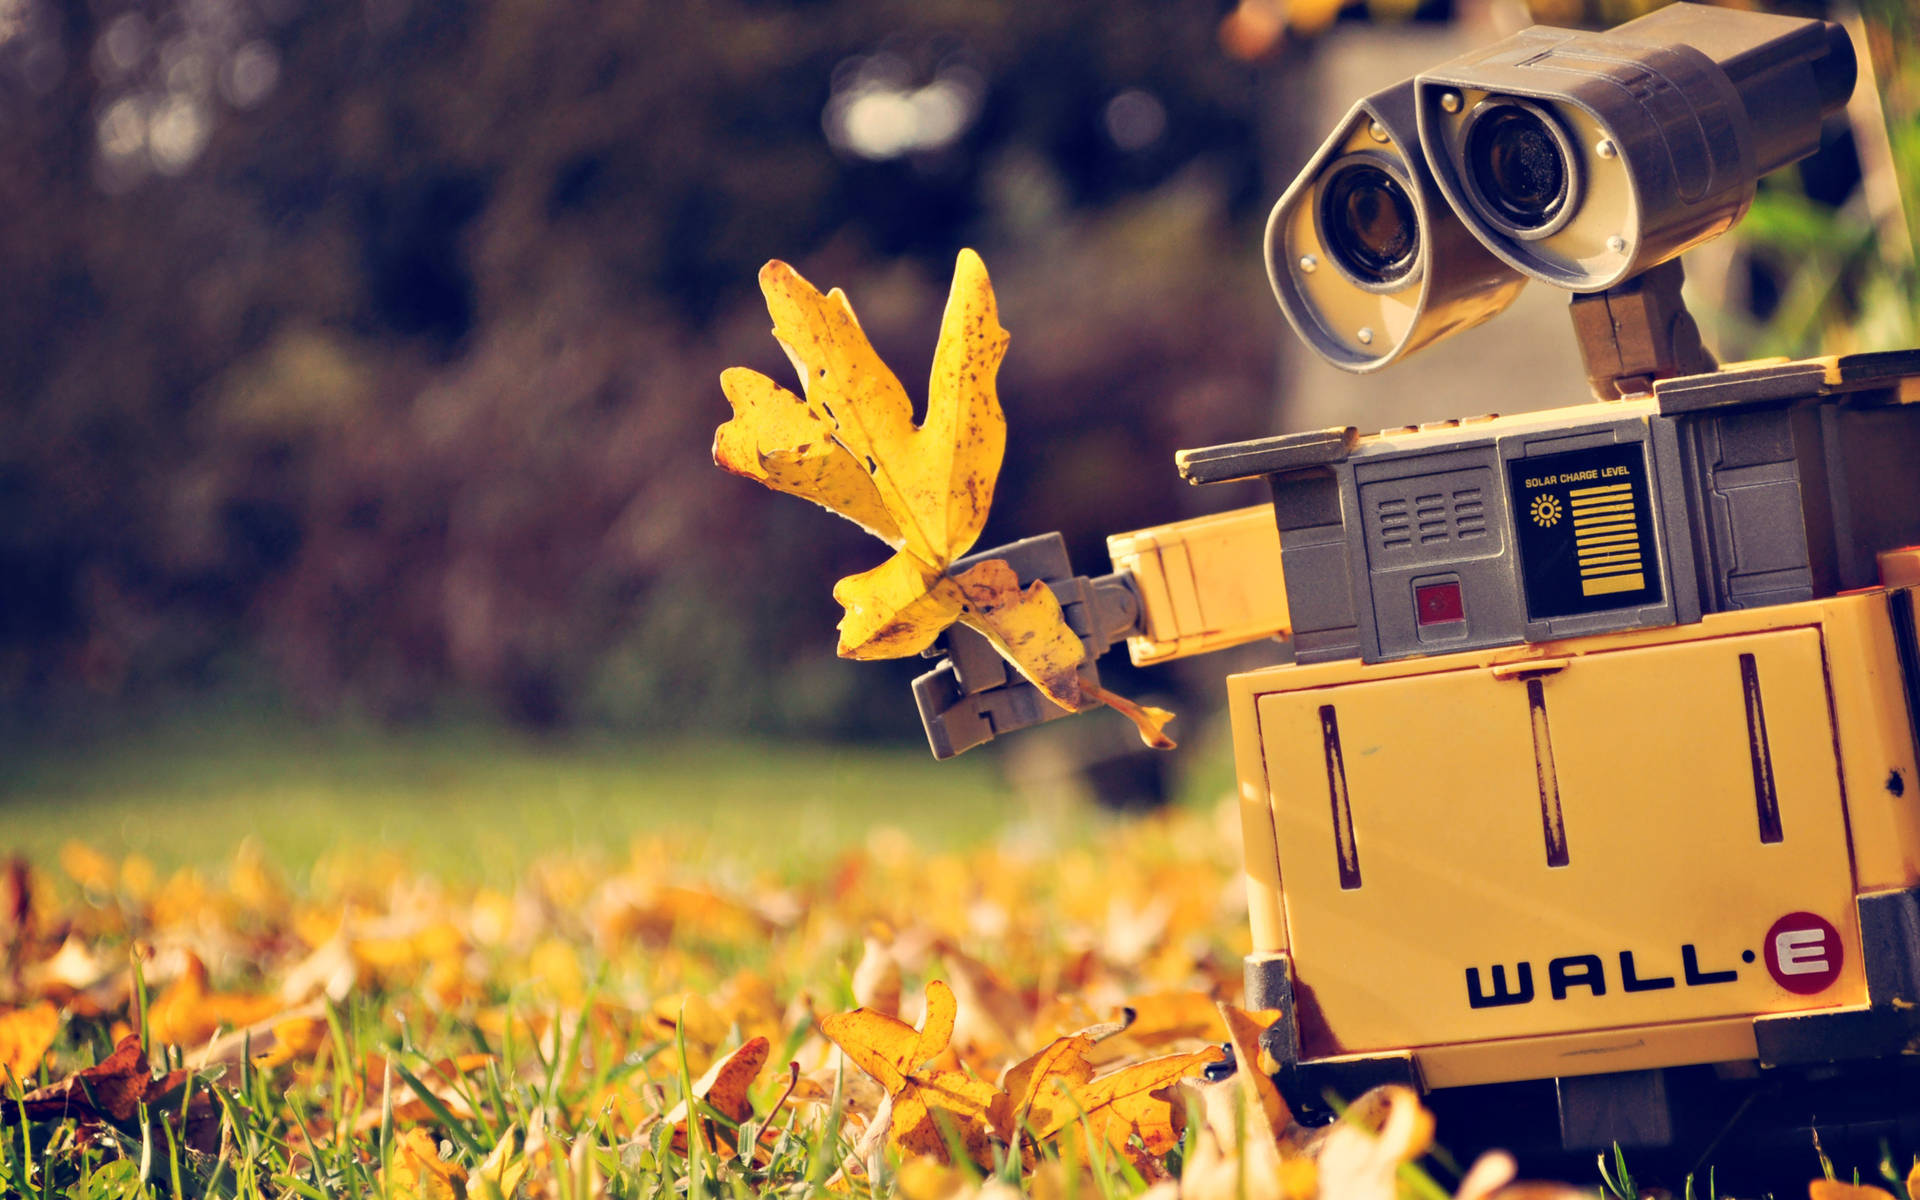 Wall E With Autumn Leaves Background